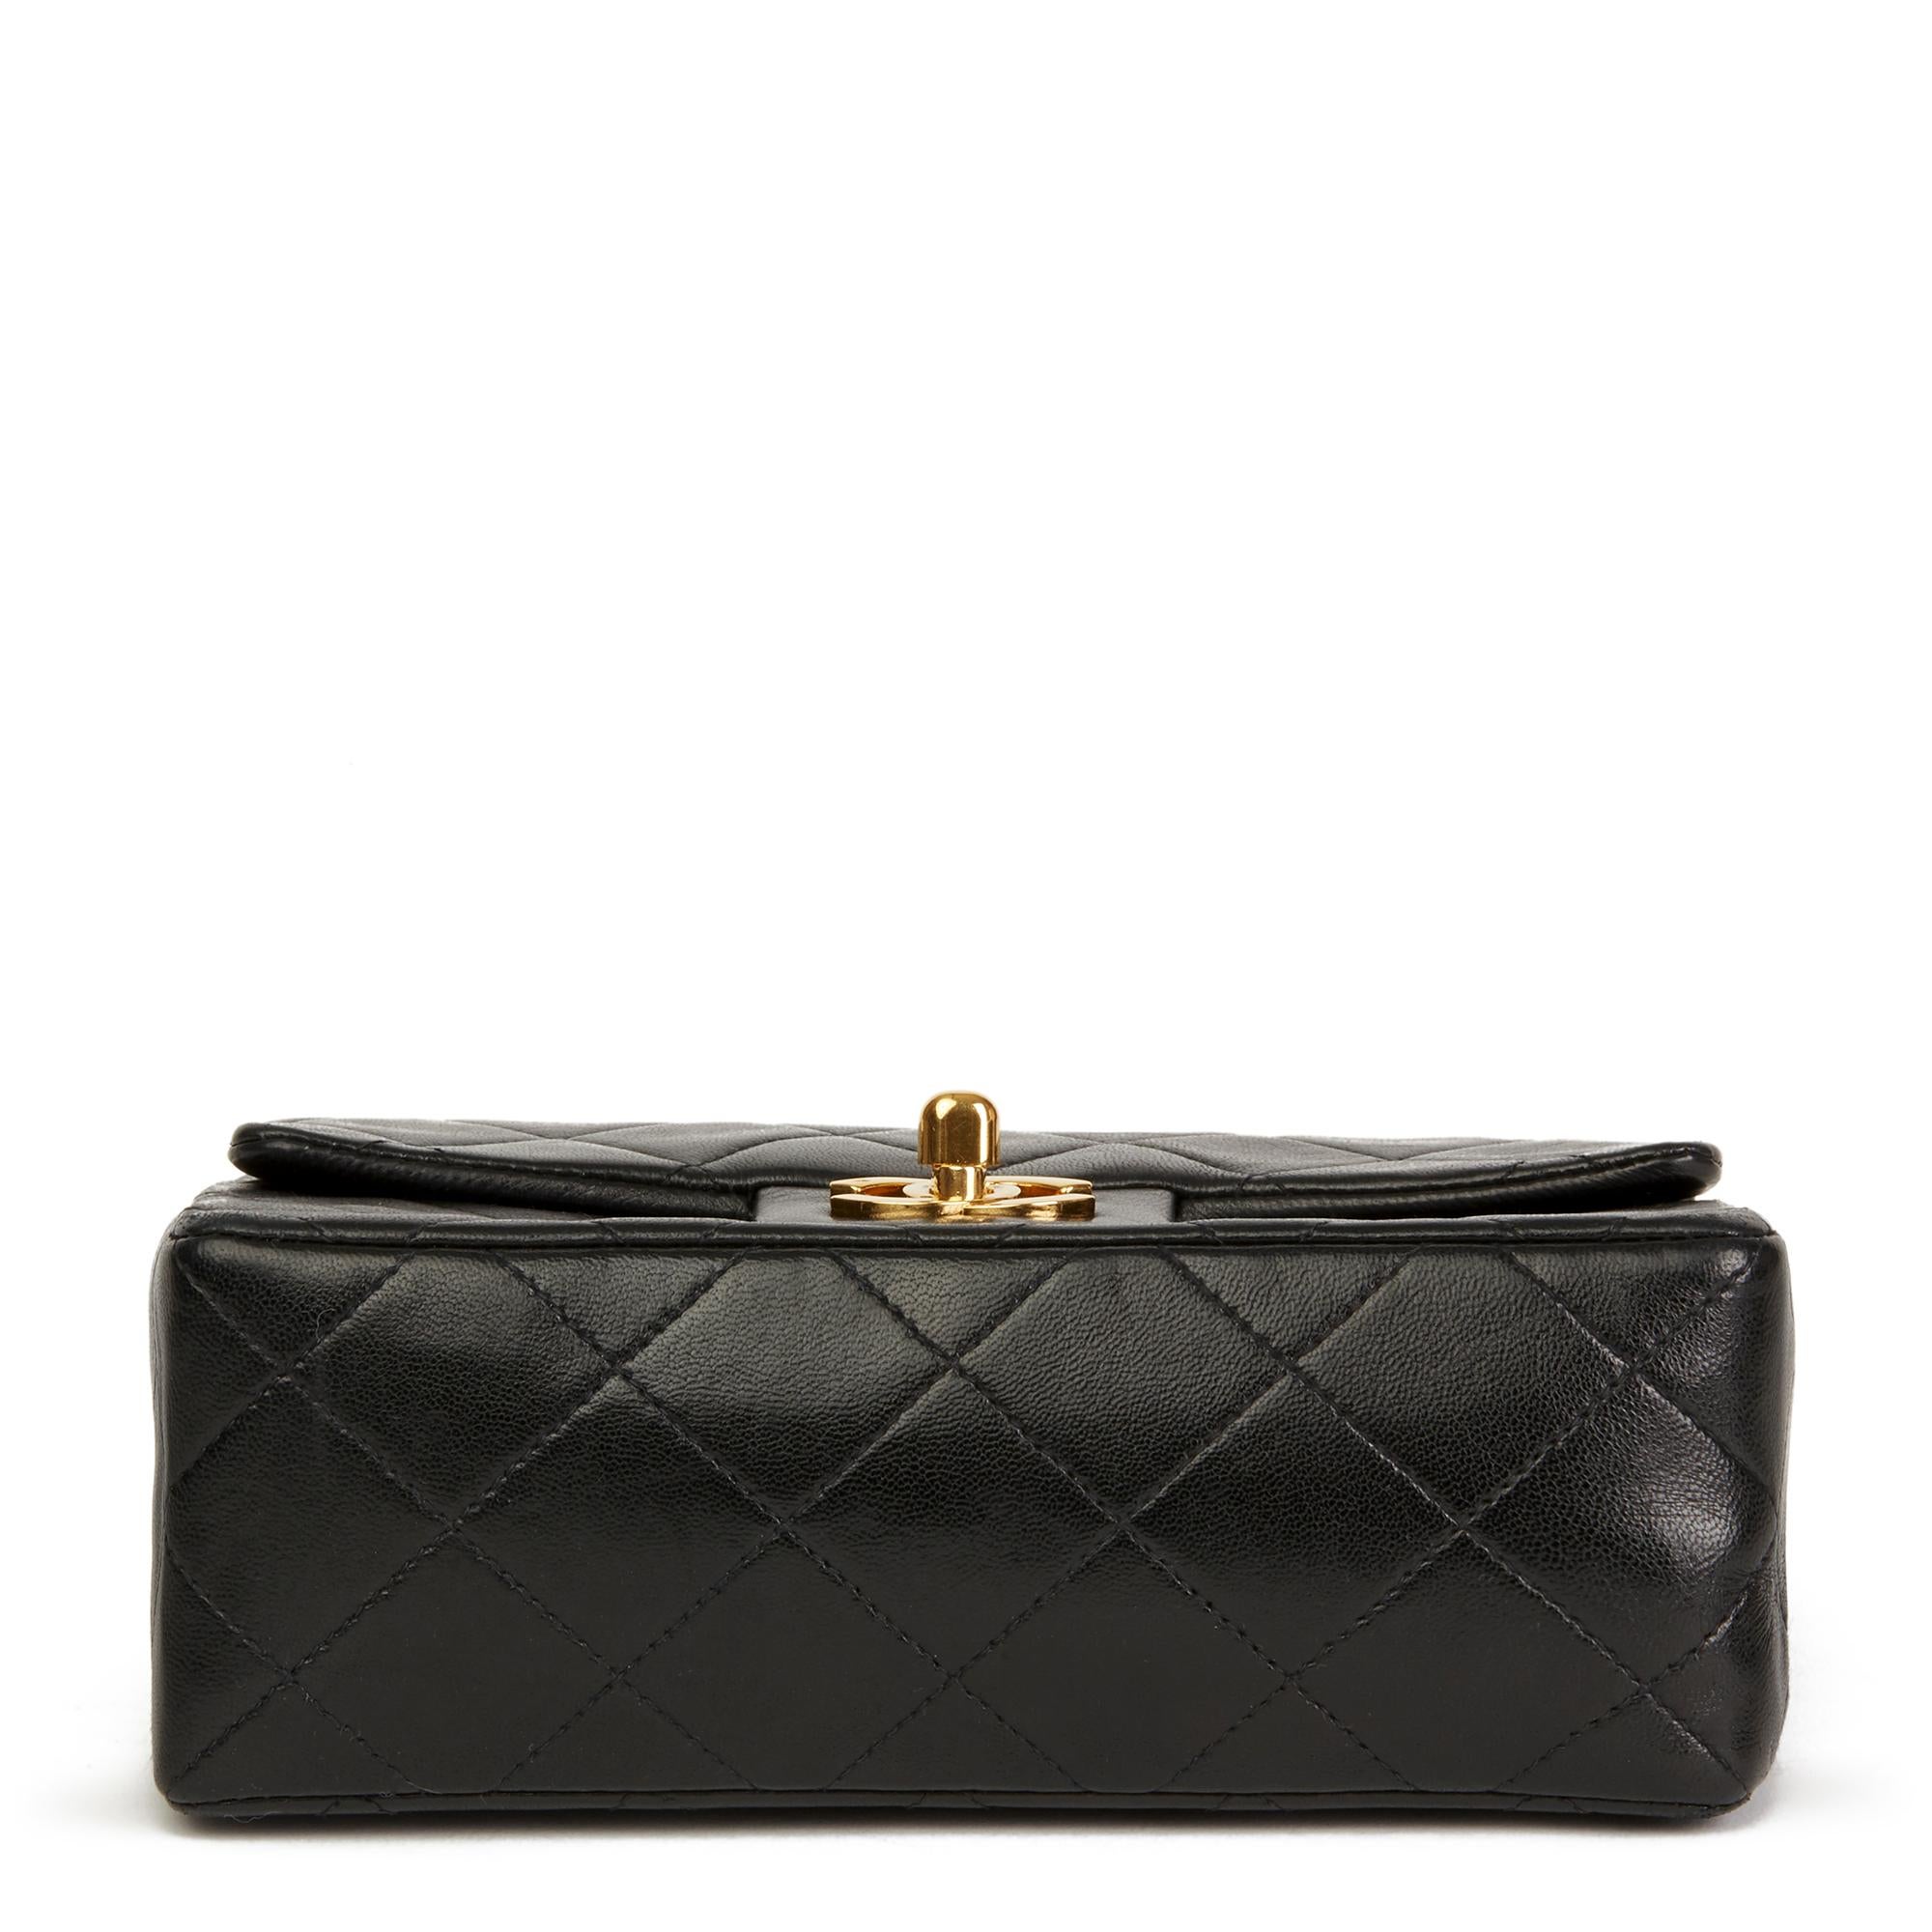 Women's 1991 Chanel Black Quilted Lambskin Vintage Mini Flap Bag